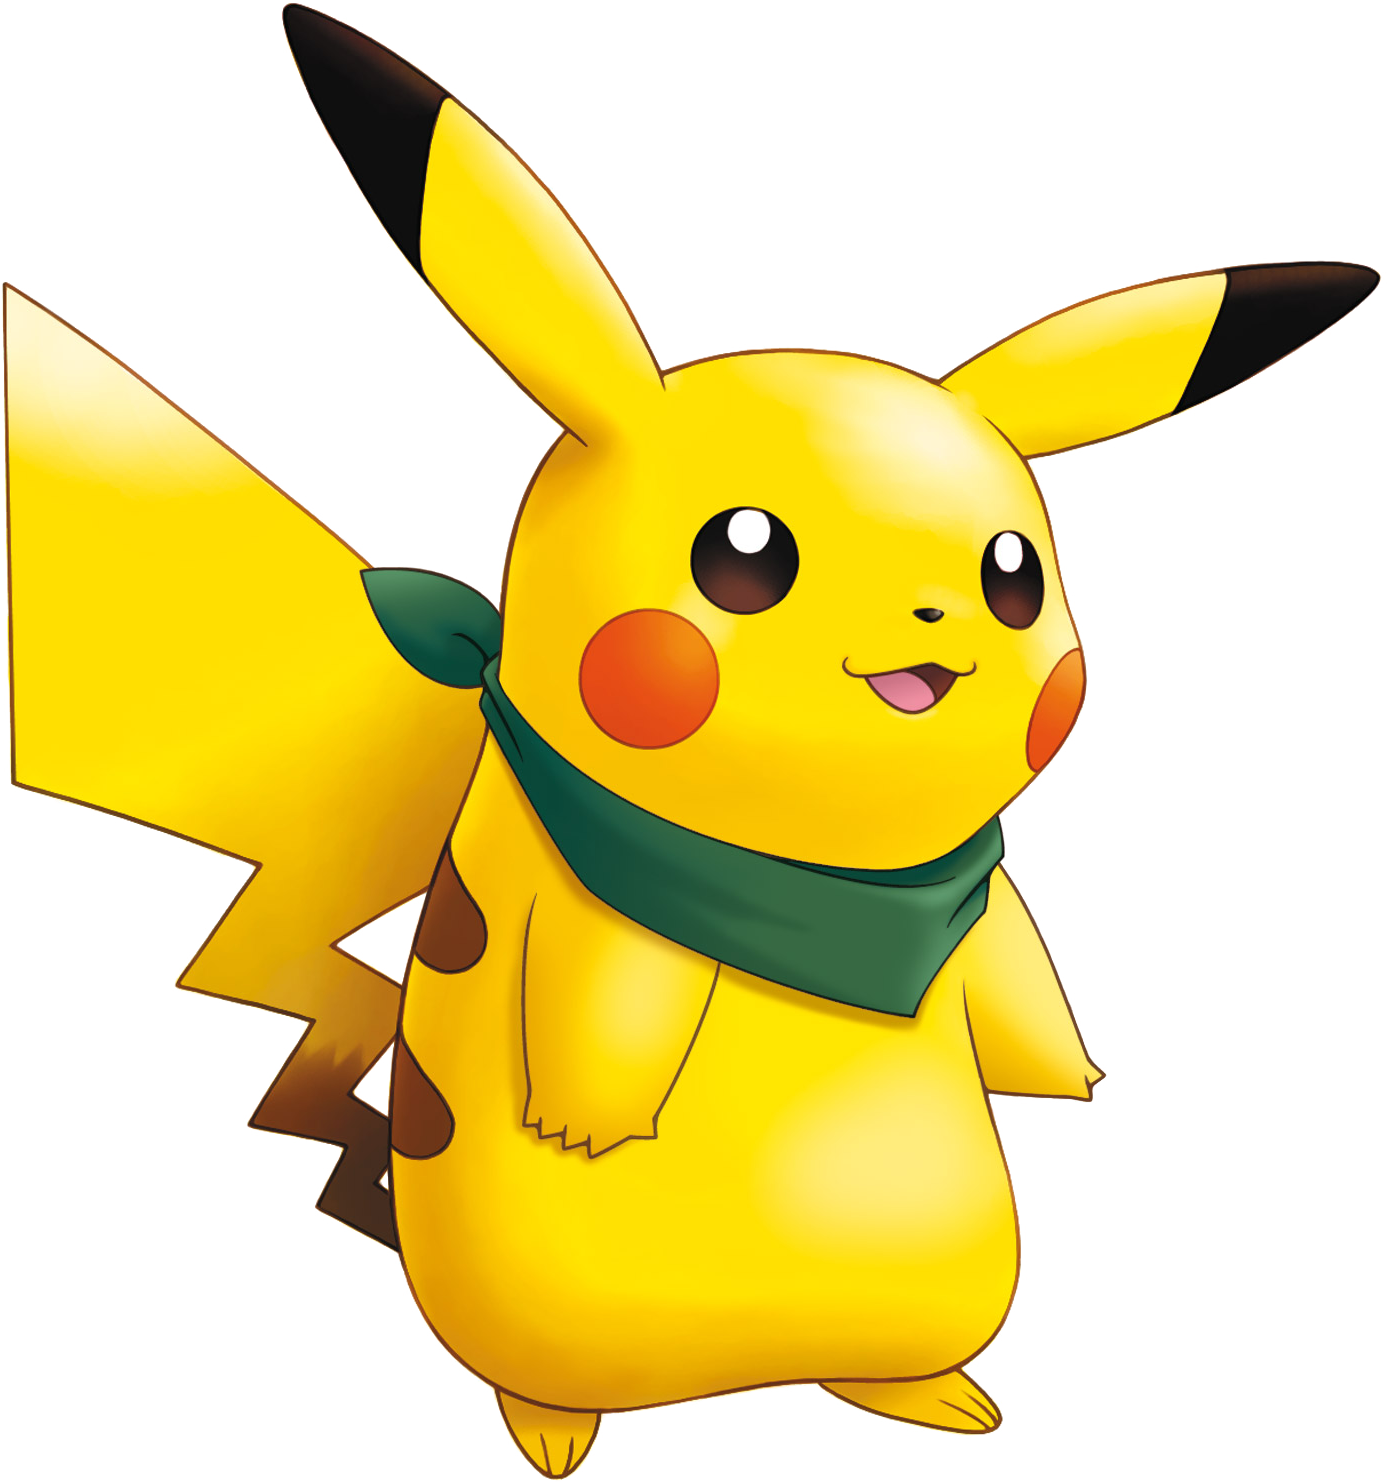 Pikachu Clipart Roblox Pikachu Roblox Transparent Free For Download On Webstockreview 2020 - roblox pokemon go wikipedia